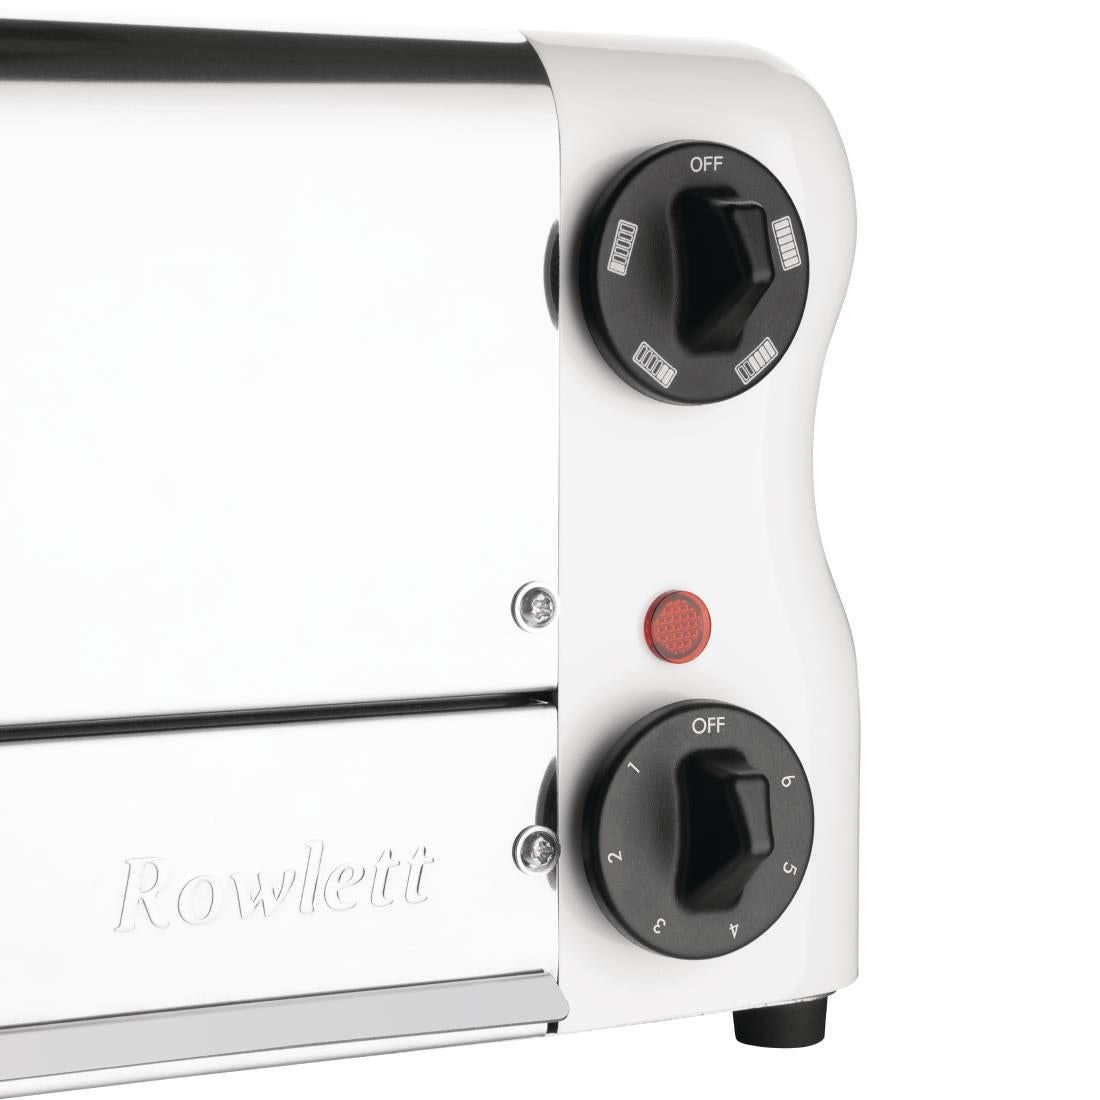 CH186 Rowlett Esprit Toaster White 6 Slot w/2x Additional Elements & Sandwich Cage JD Catering Equipment Solutions Ltd